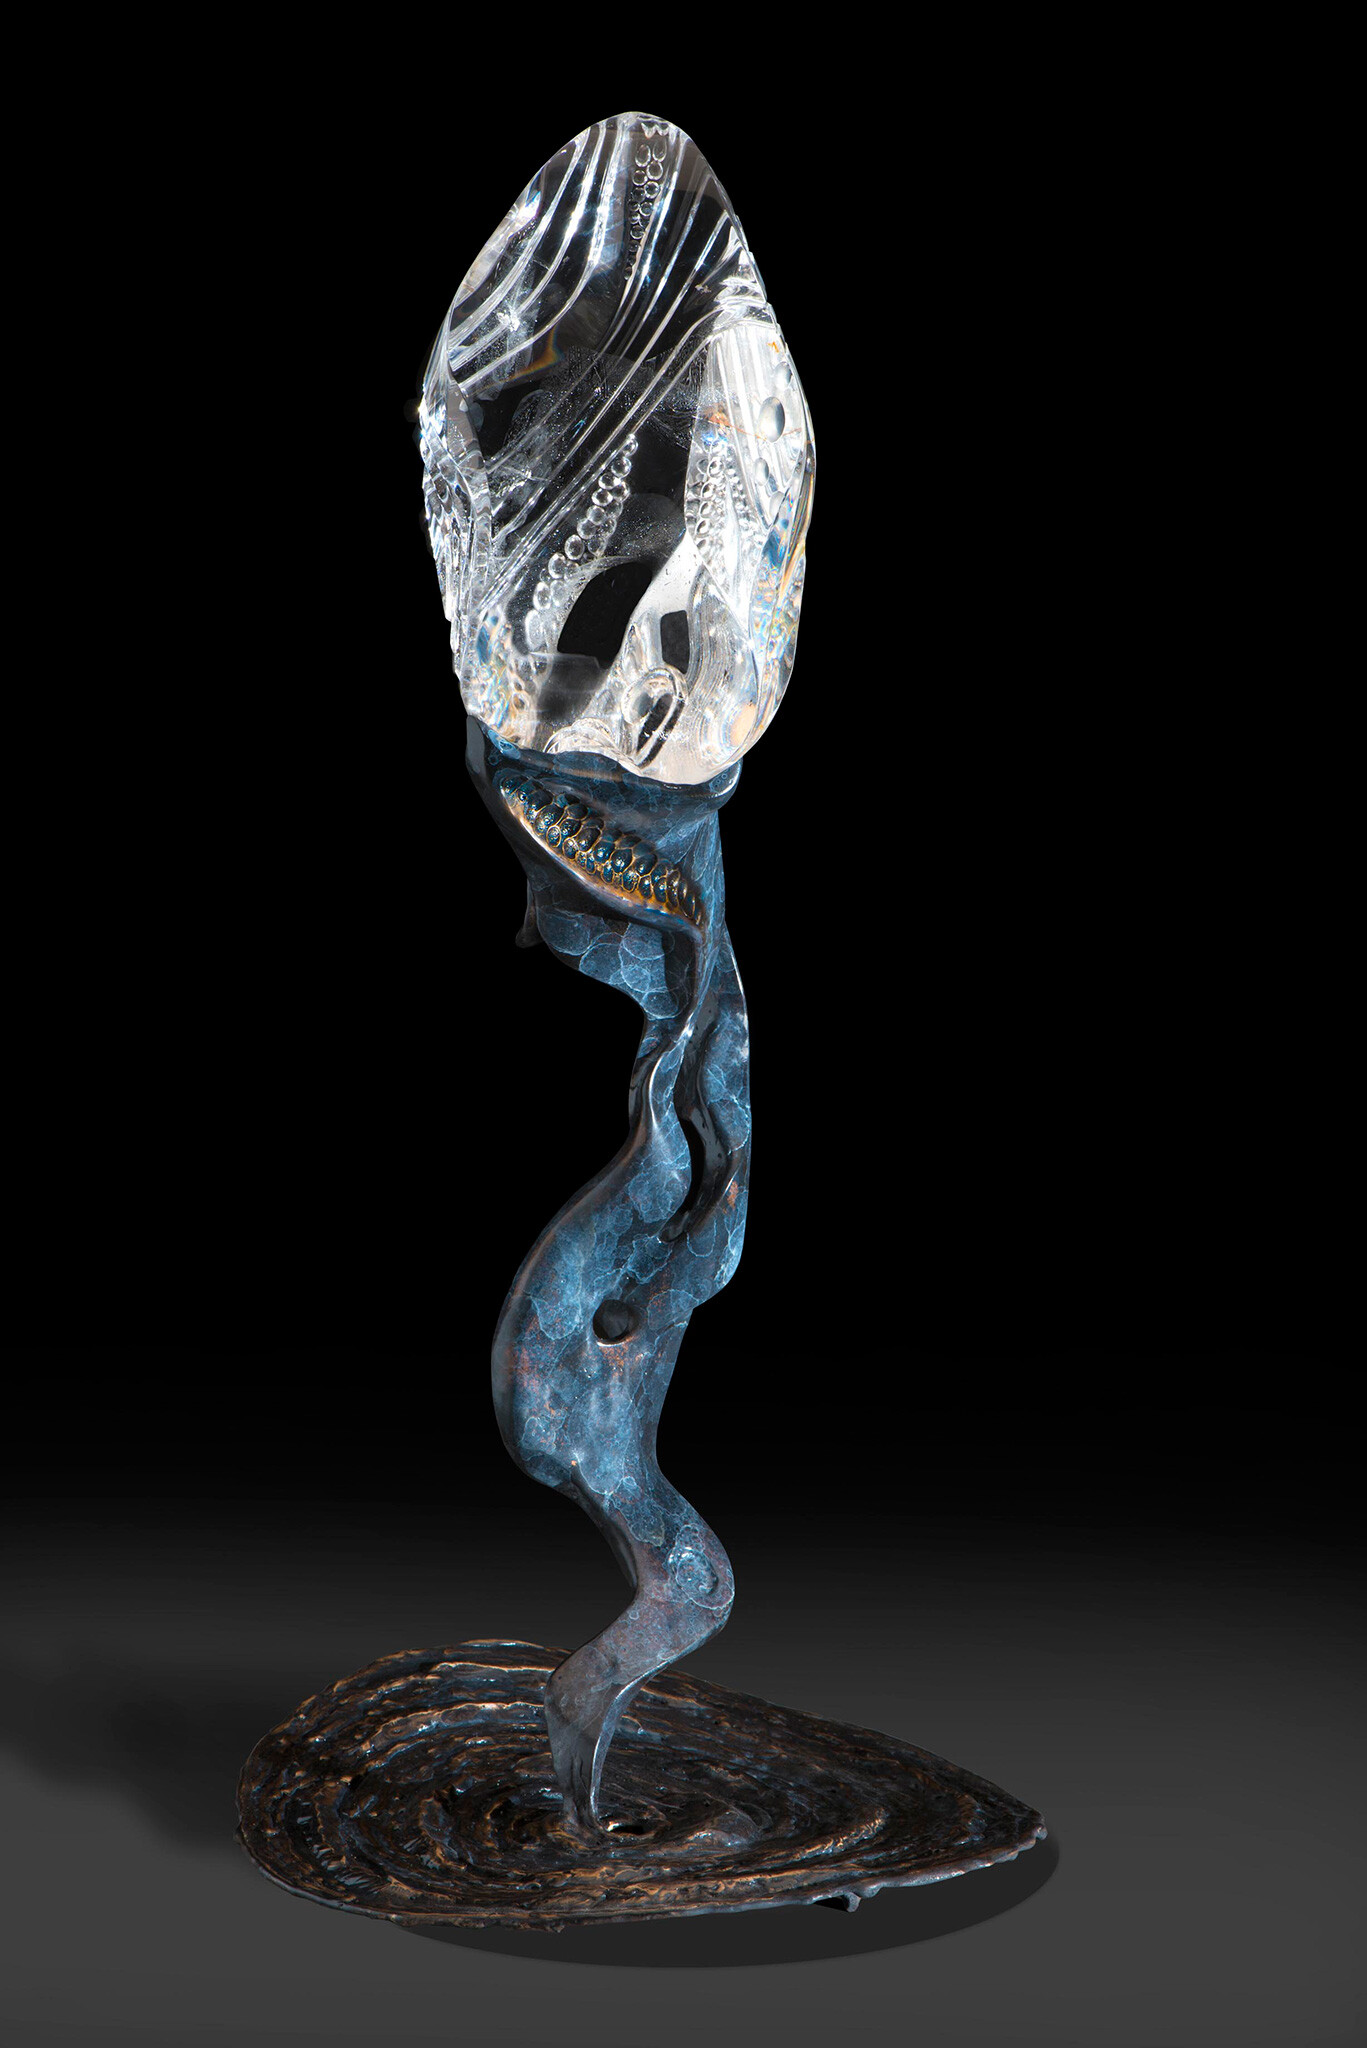 Spectacular gemstone sculptures by Lawrence Stoller1367 x 2048